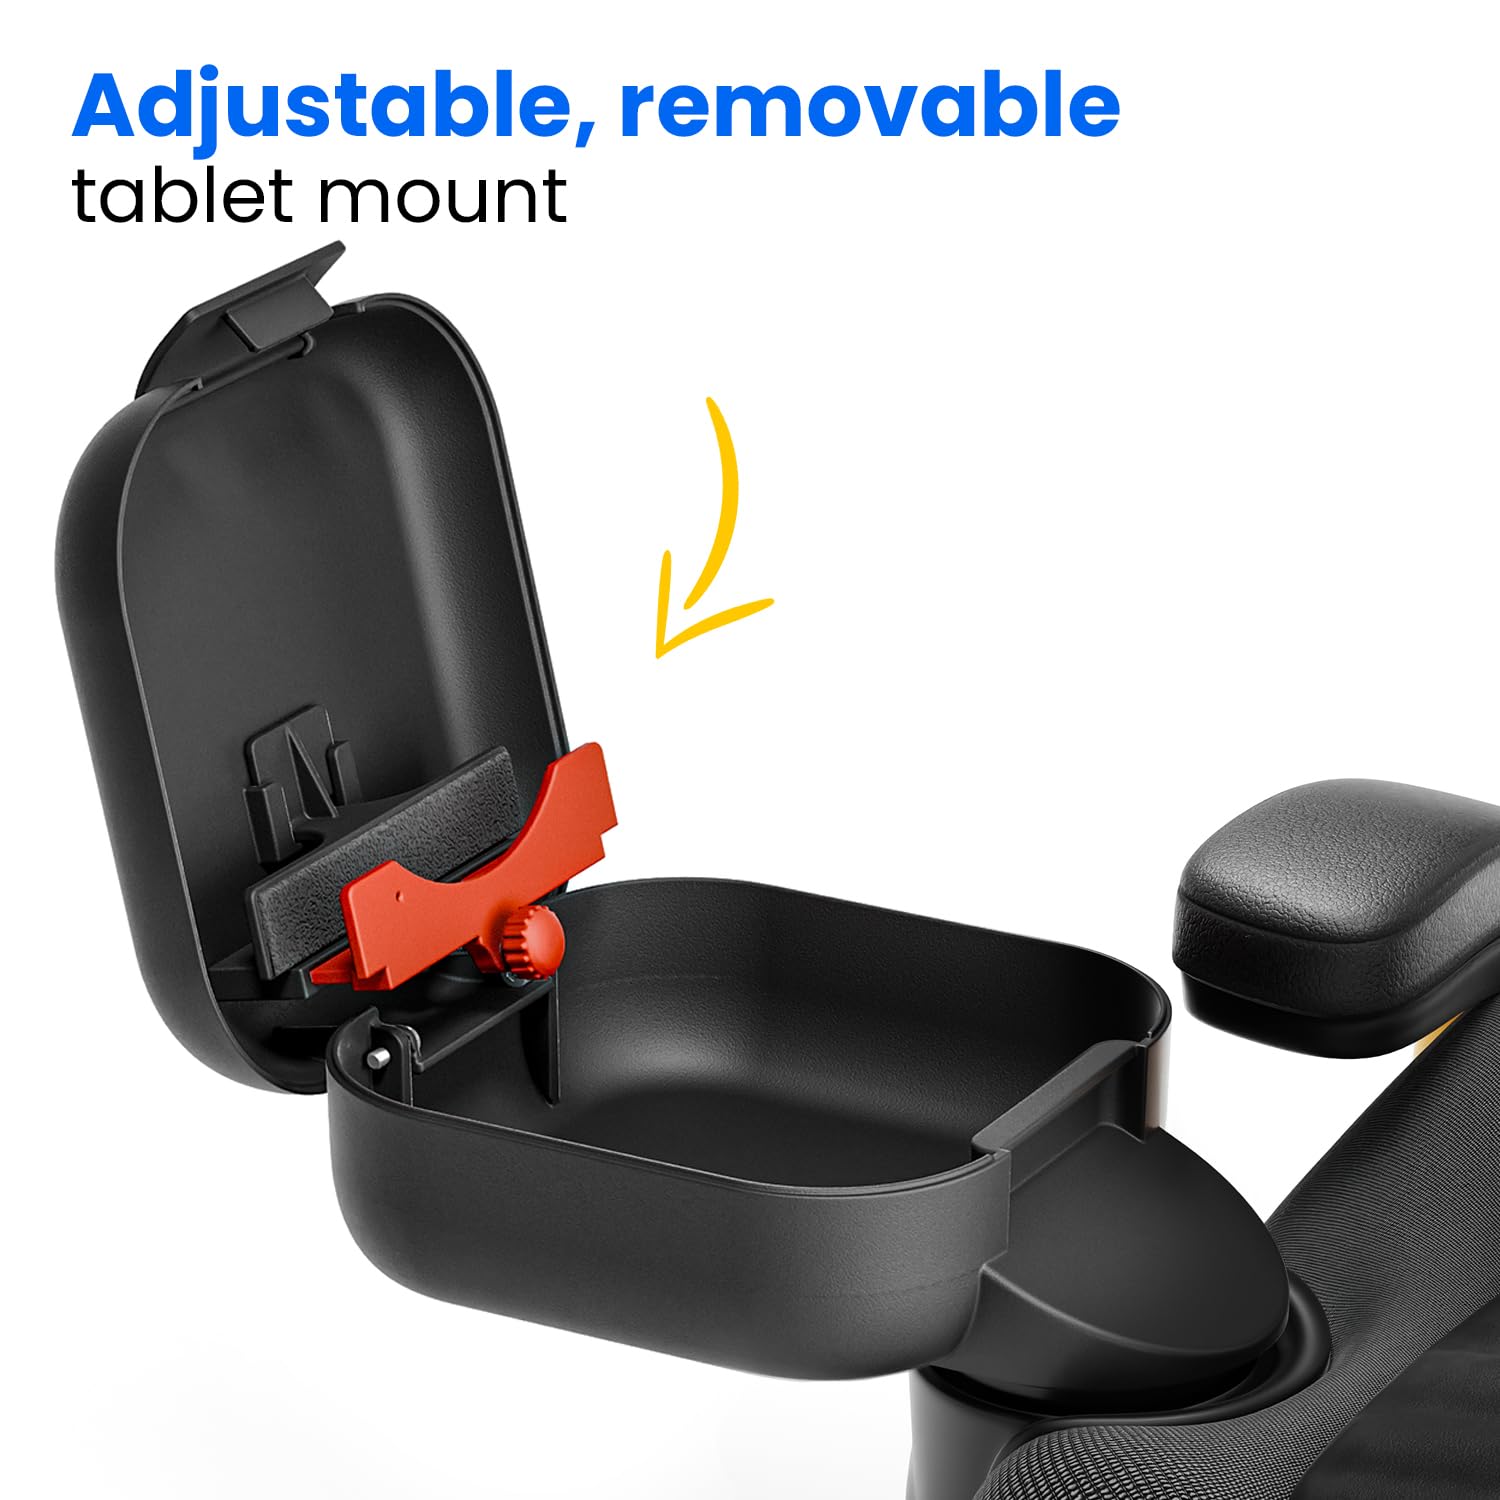 Integral Kid Console - Crash Tested - Upgraded Design - Car Seat Cup Holder Storage Container with Latch and Tablet Mount - Universal Adjustable Car Back Seat Storage (Large Base)